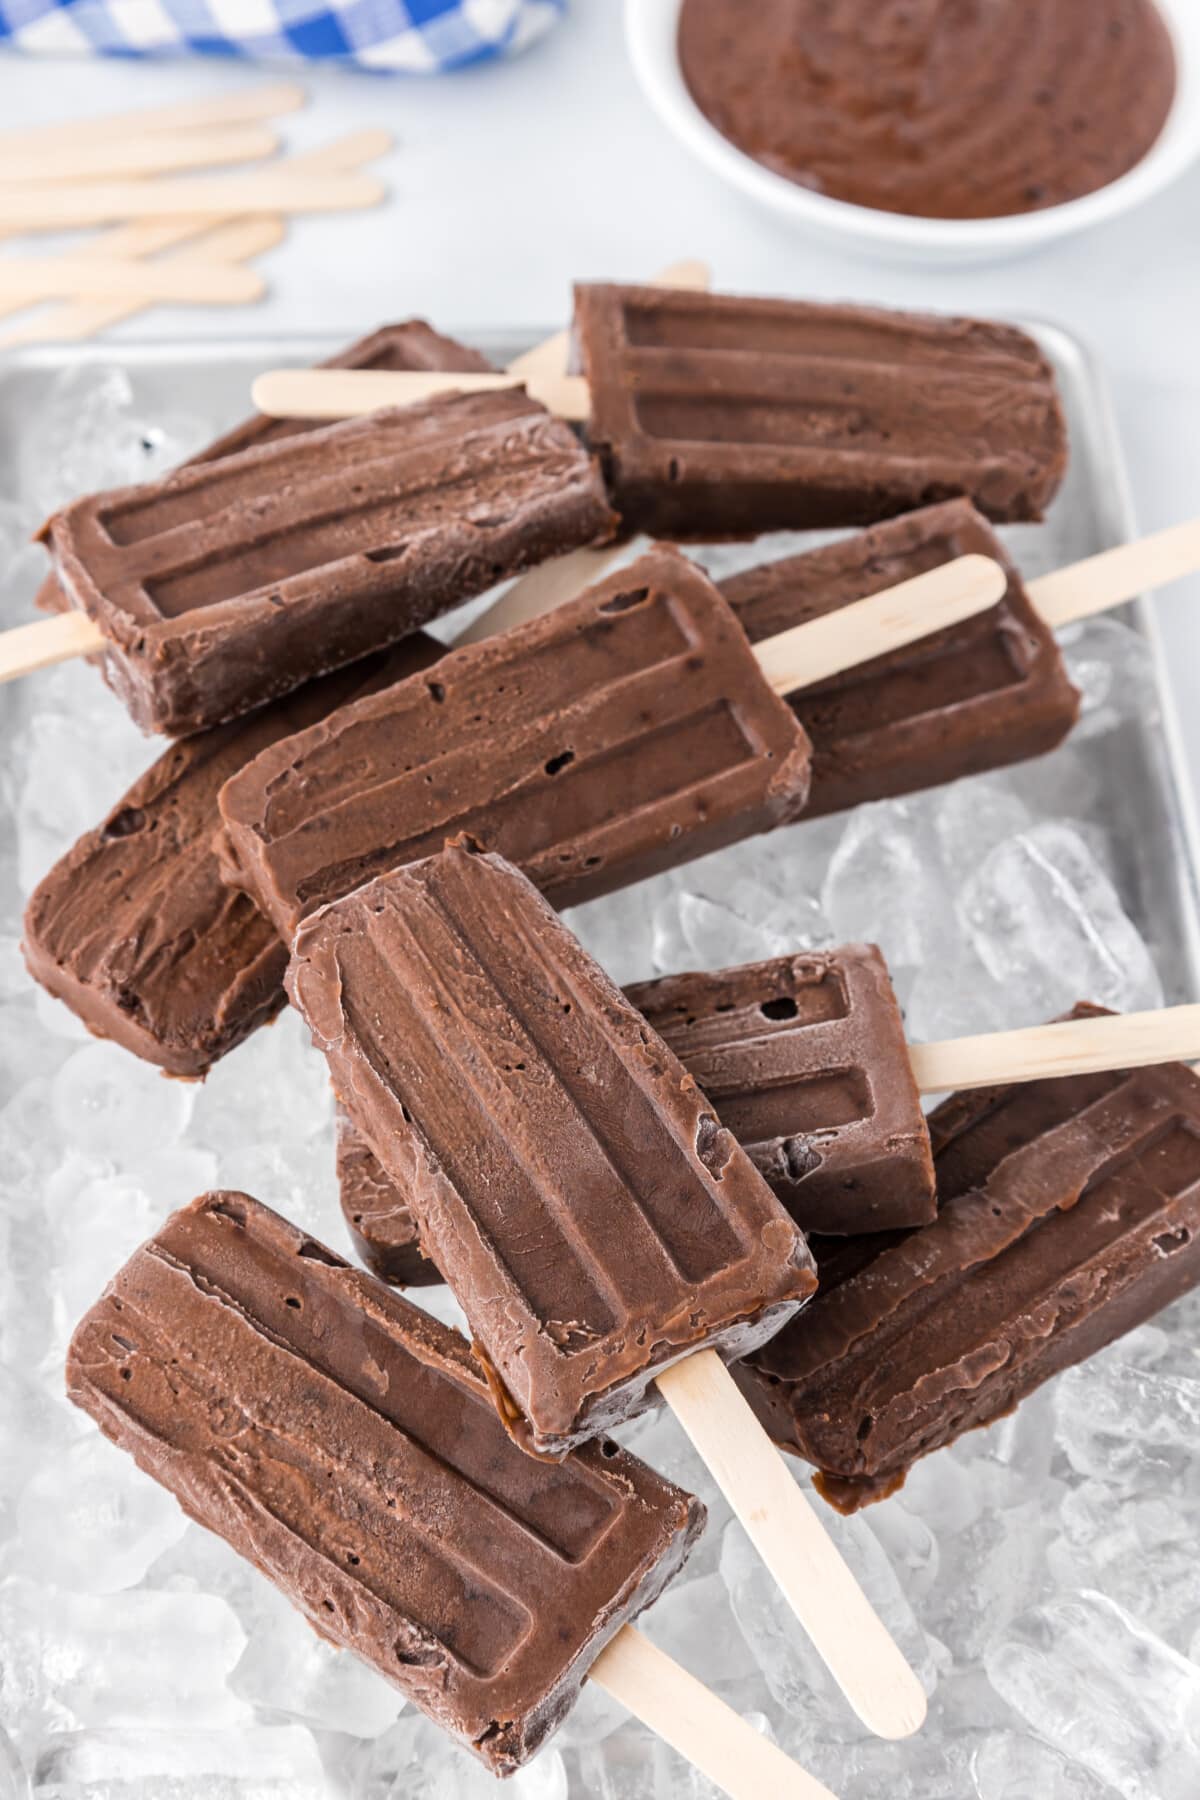 Chocolate pudding Pops on ice